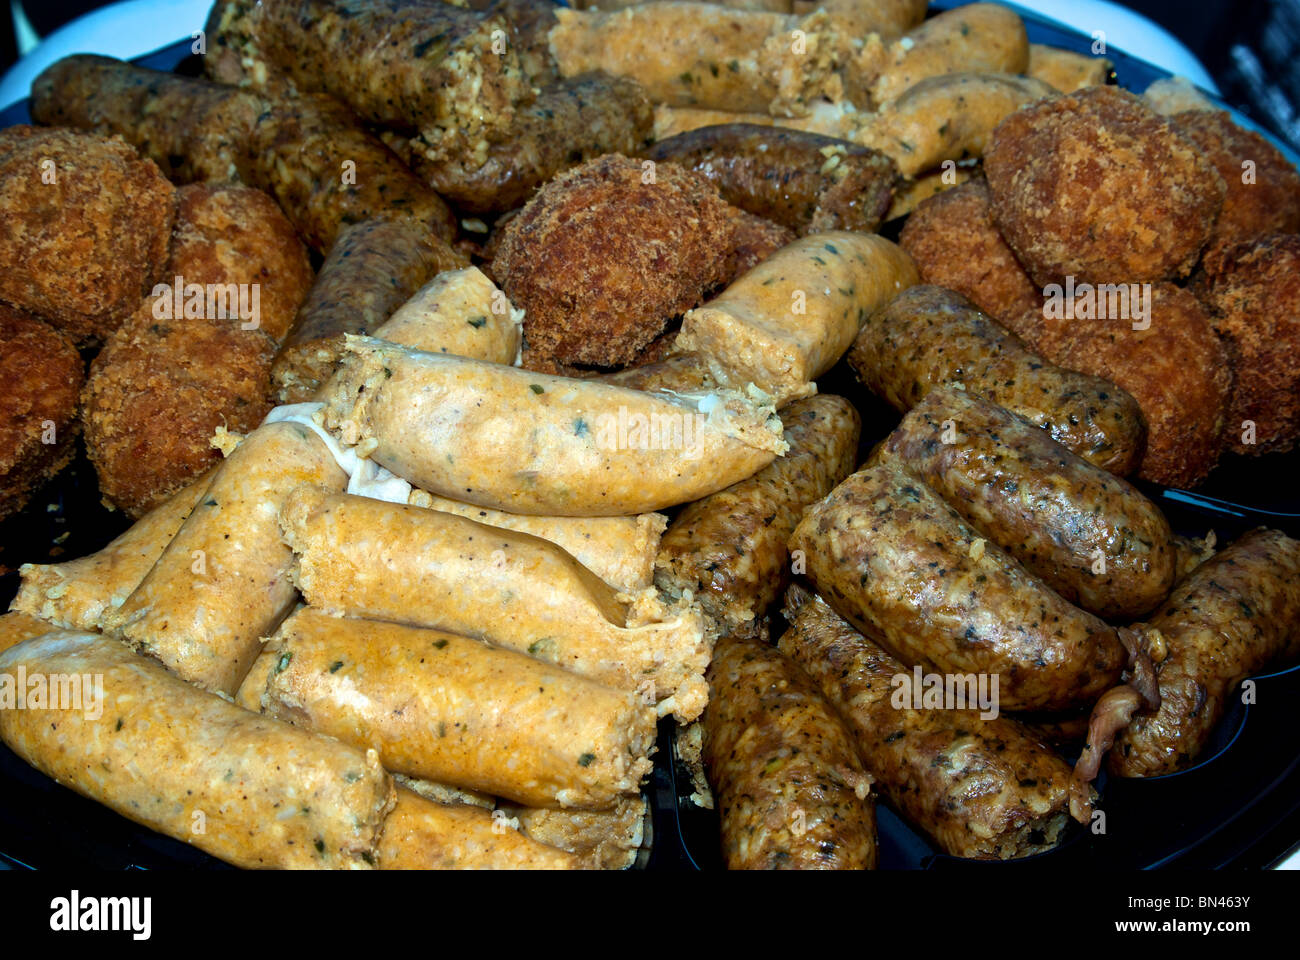 Boudin sausage sampler appetizer tray from Brown's Food Center in Hackberry Cameron Parish LA Stock Photo